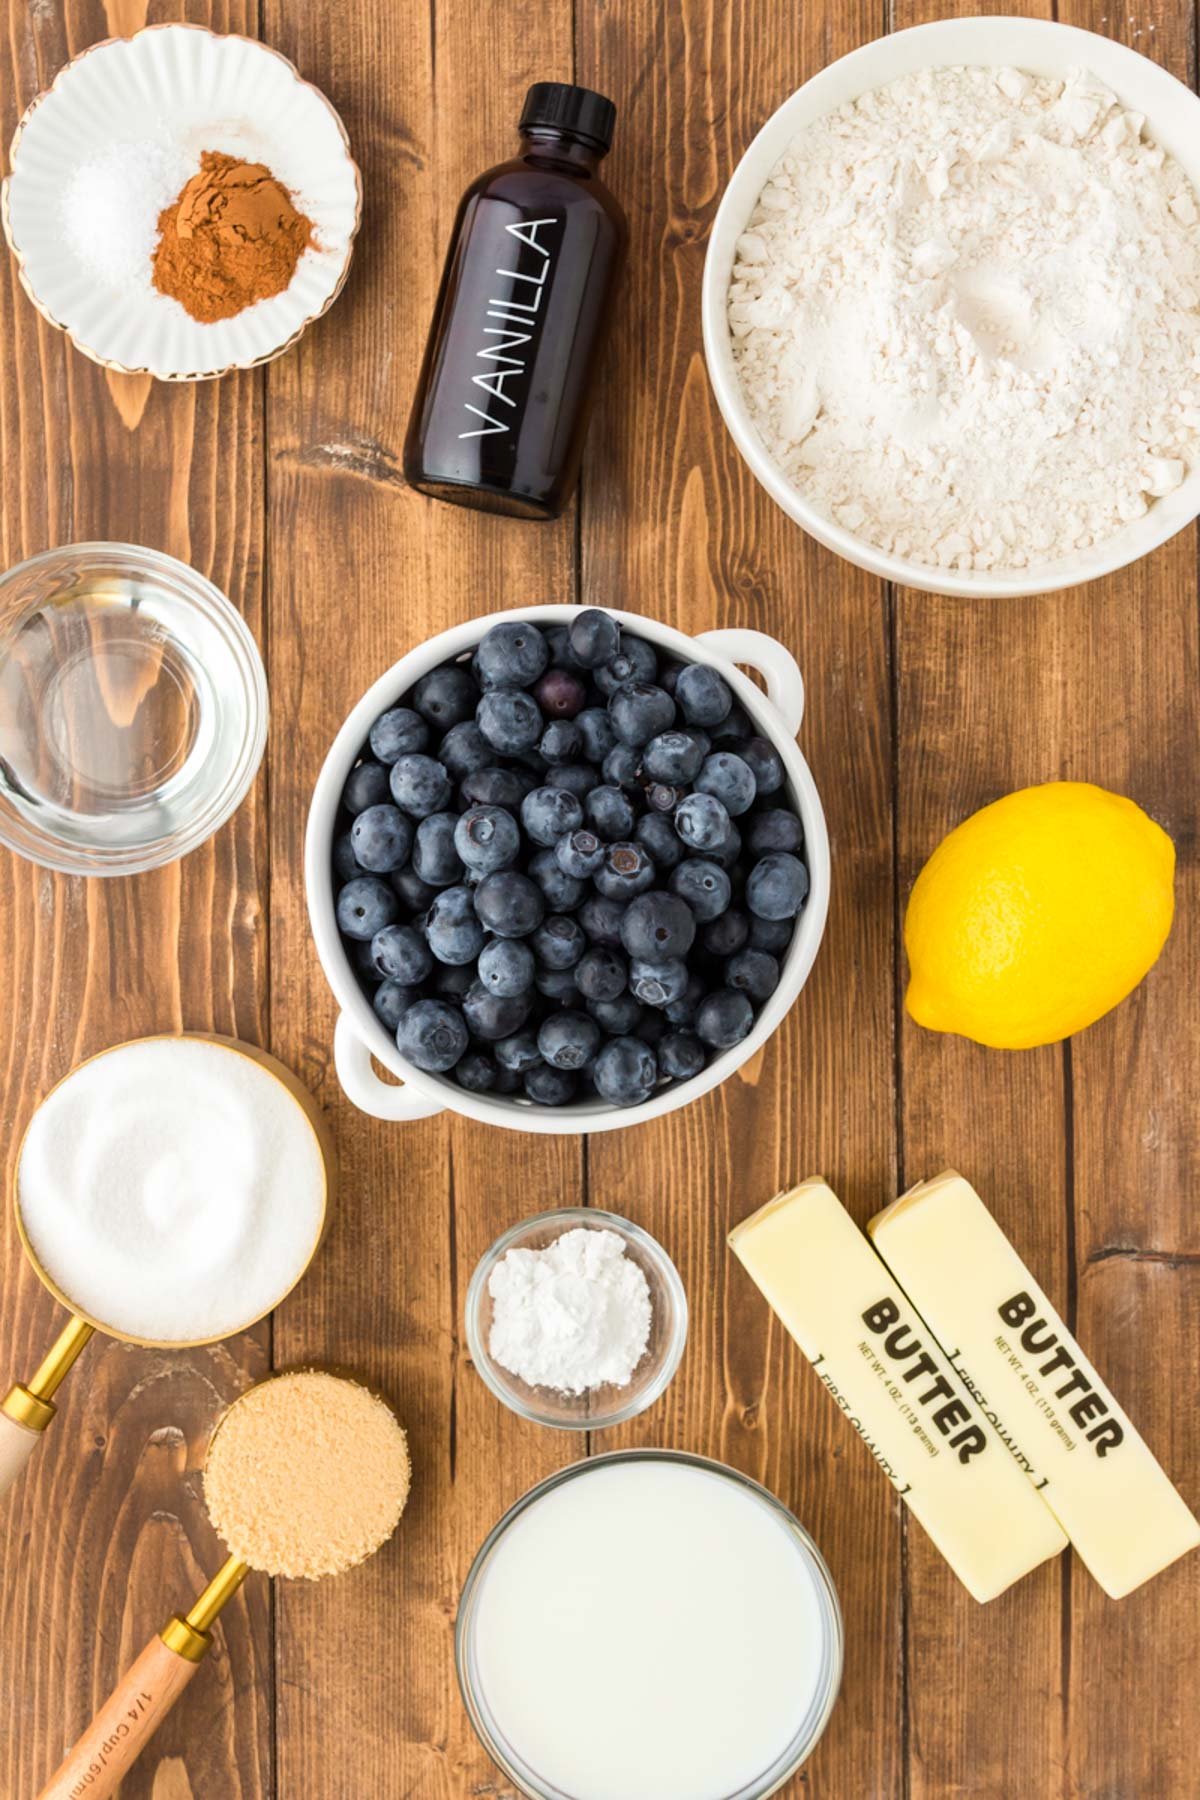 Ingredients to make blueberry cobbler on a wooden table.